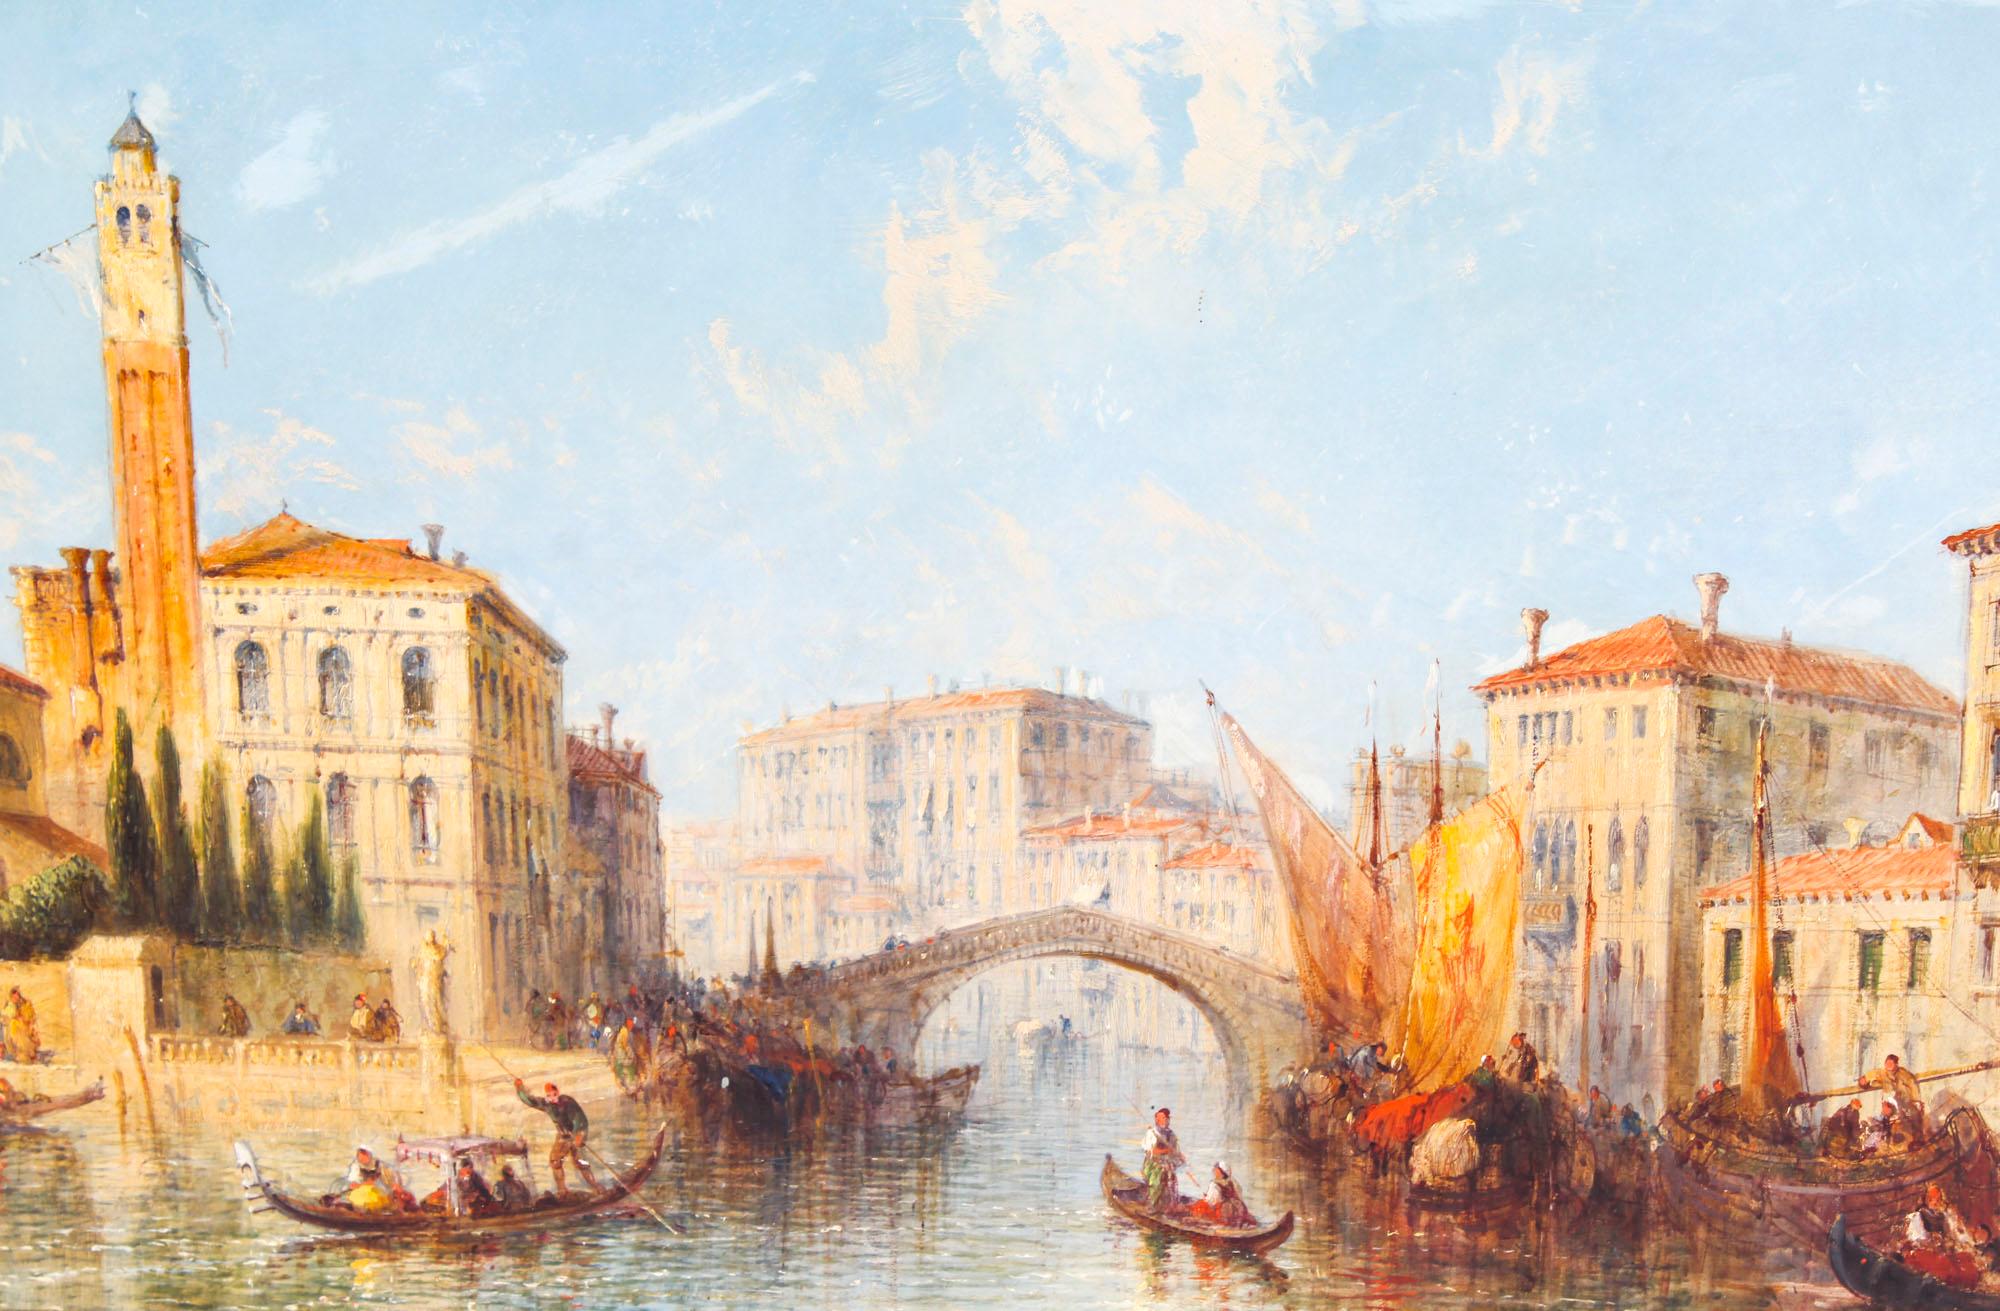 This wonderful oil on canvas painting by Jane Vivian (Active 1869-1890) beautifully captures a Venetian Scene of The Grand Canal.

This is a stunning painting of the most painted city in the history of art - Venice.

It is housed in it's original